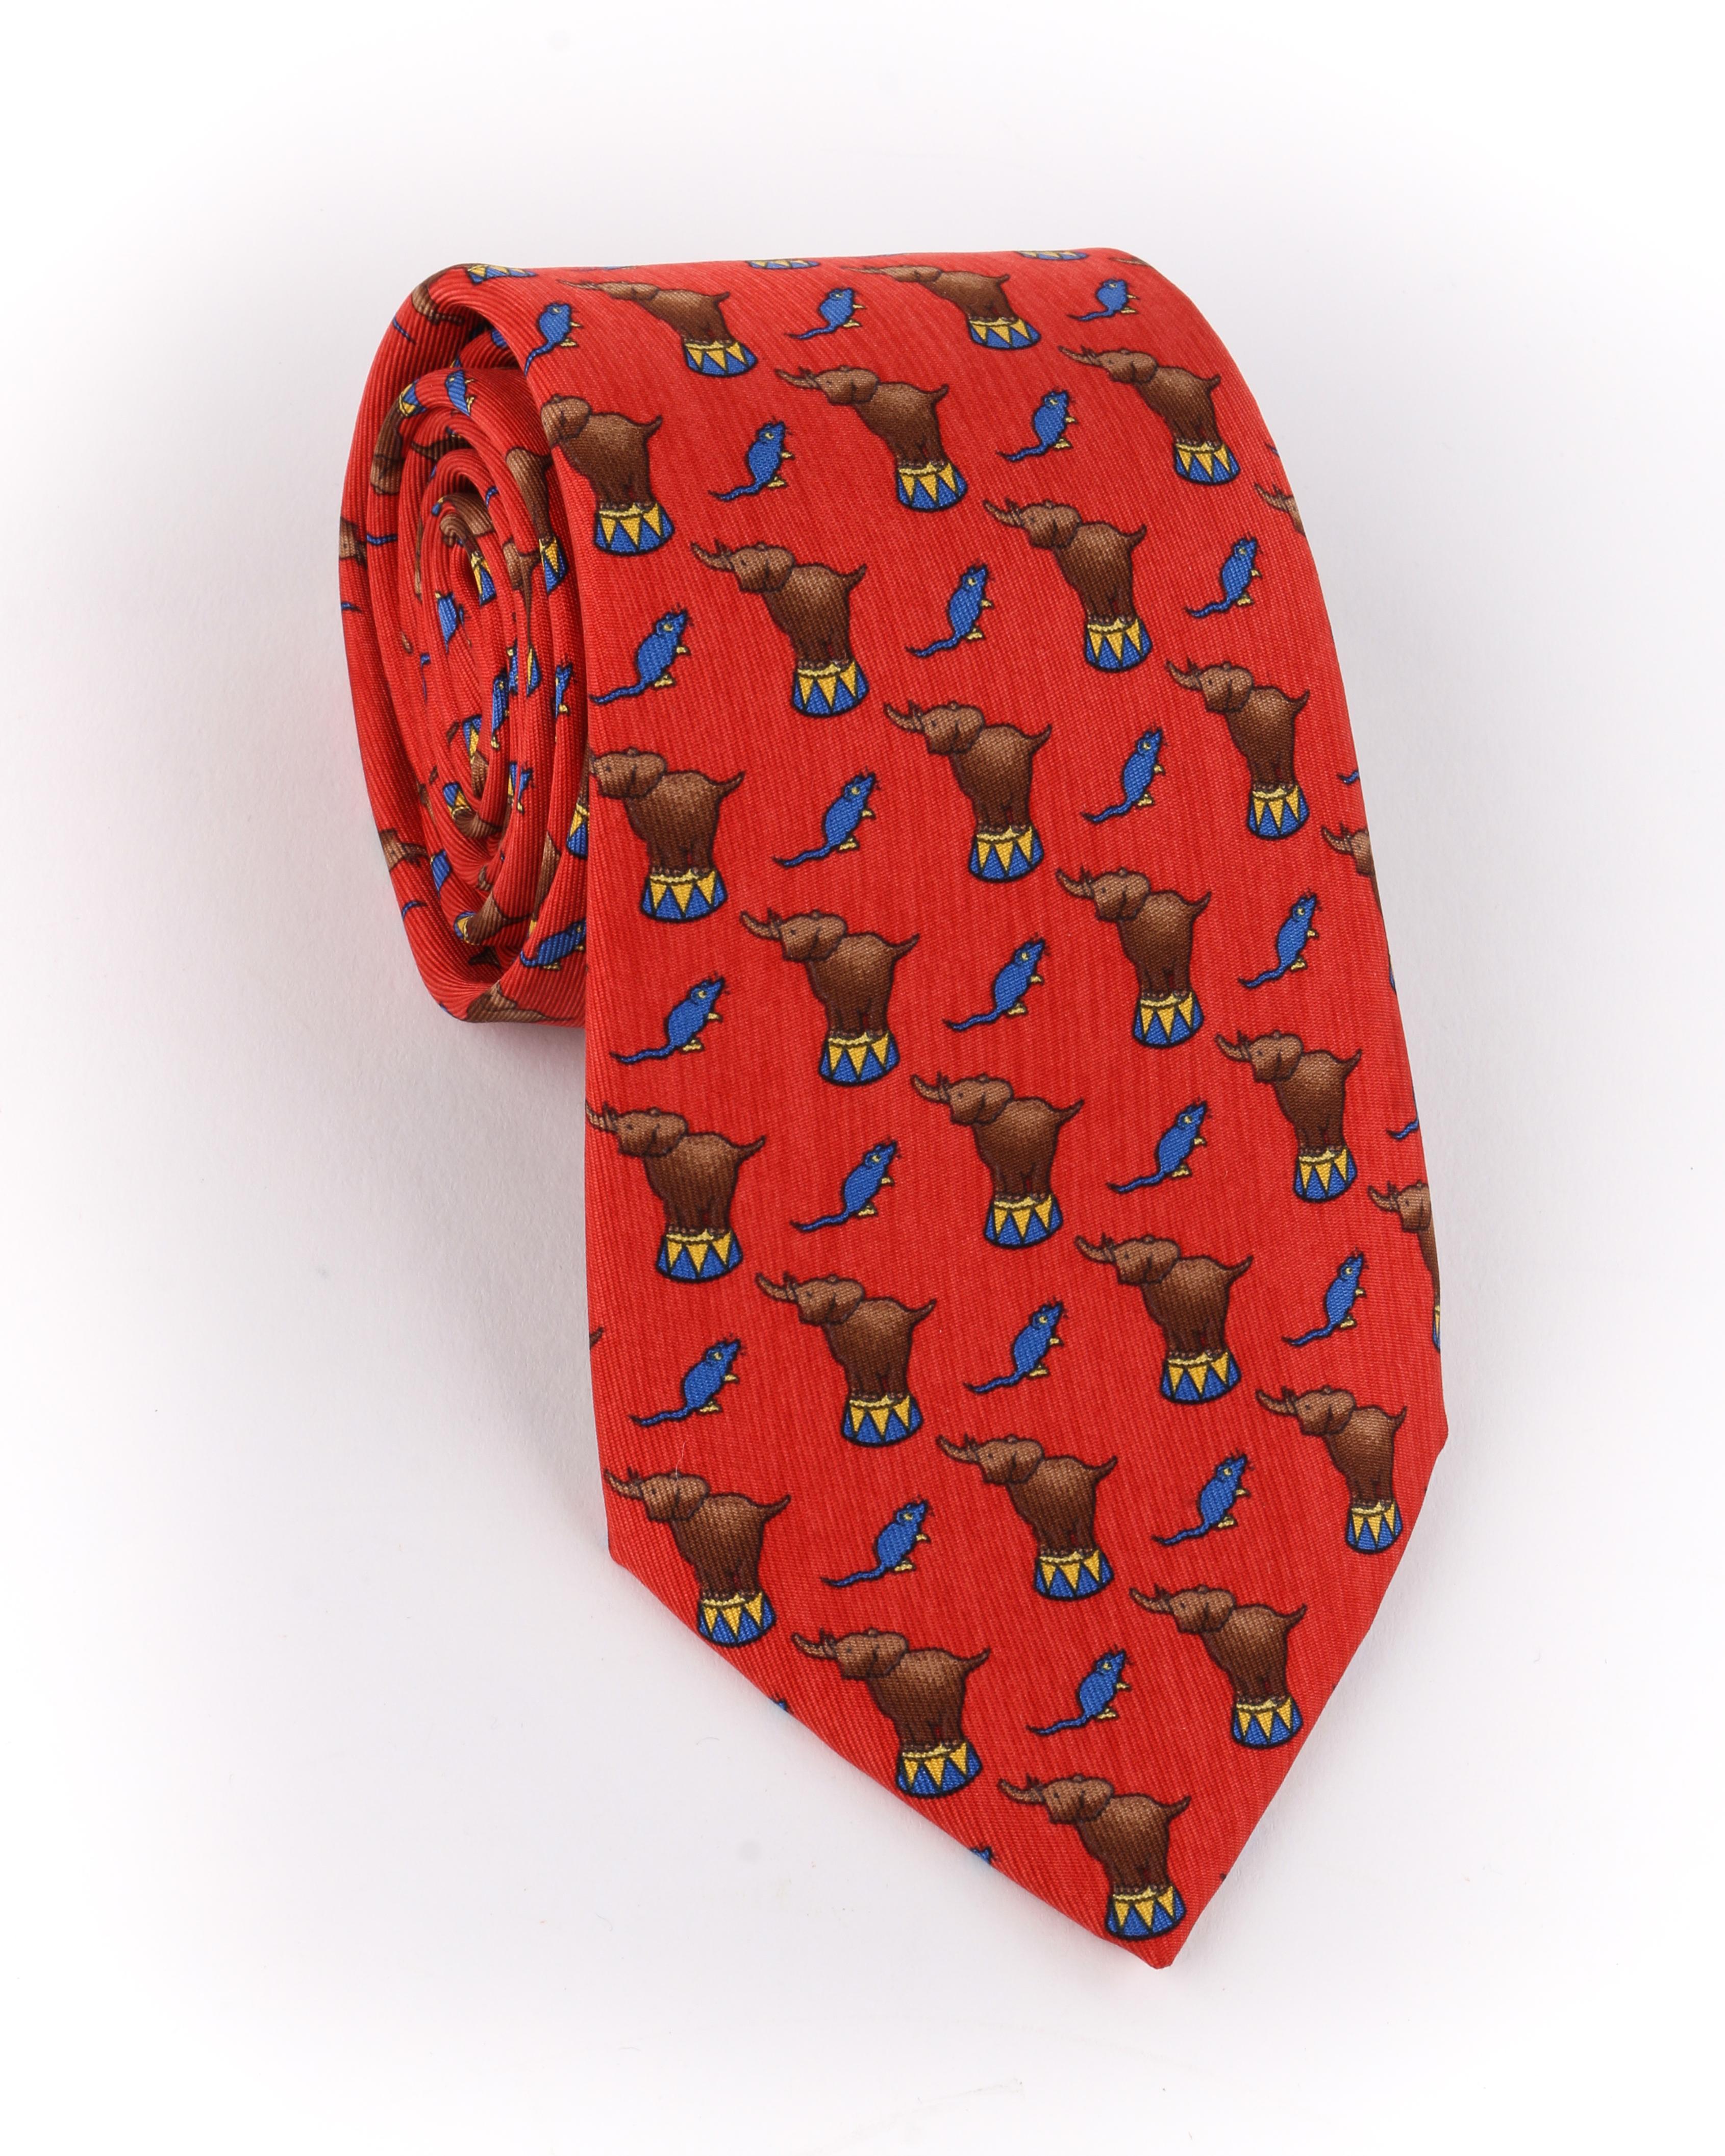 DESCRIPTION: HERMES Red Circus Elephant & Mouse Print 5 Fold Silk Necktie Tie 7681 TA
 
Brand / Manufacturer: Hermes
Collection: 
Designer: 
Manufacturer Style Name: 
Style: 5 fold necktie
Color(s): Multi in shades of red, brown, blue, and